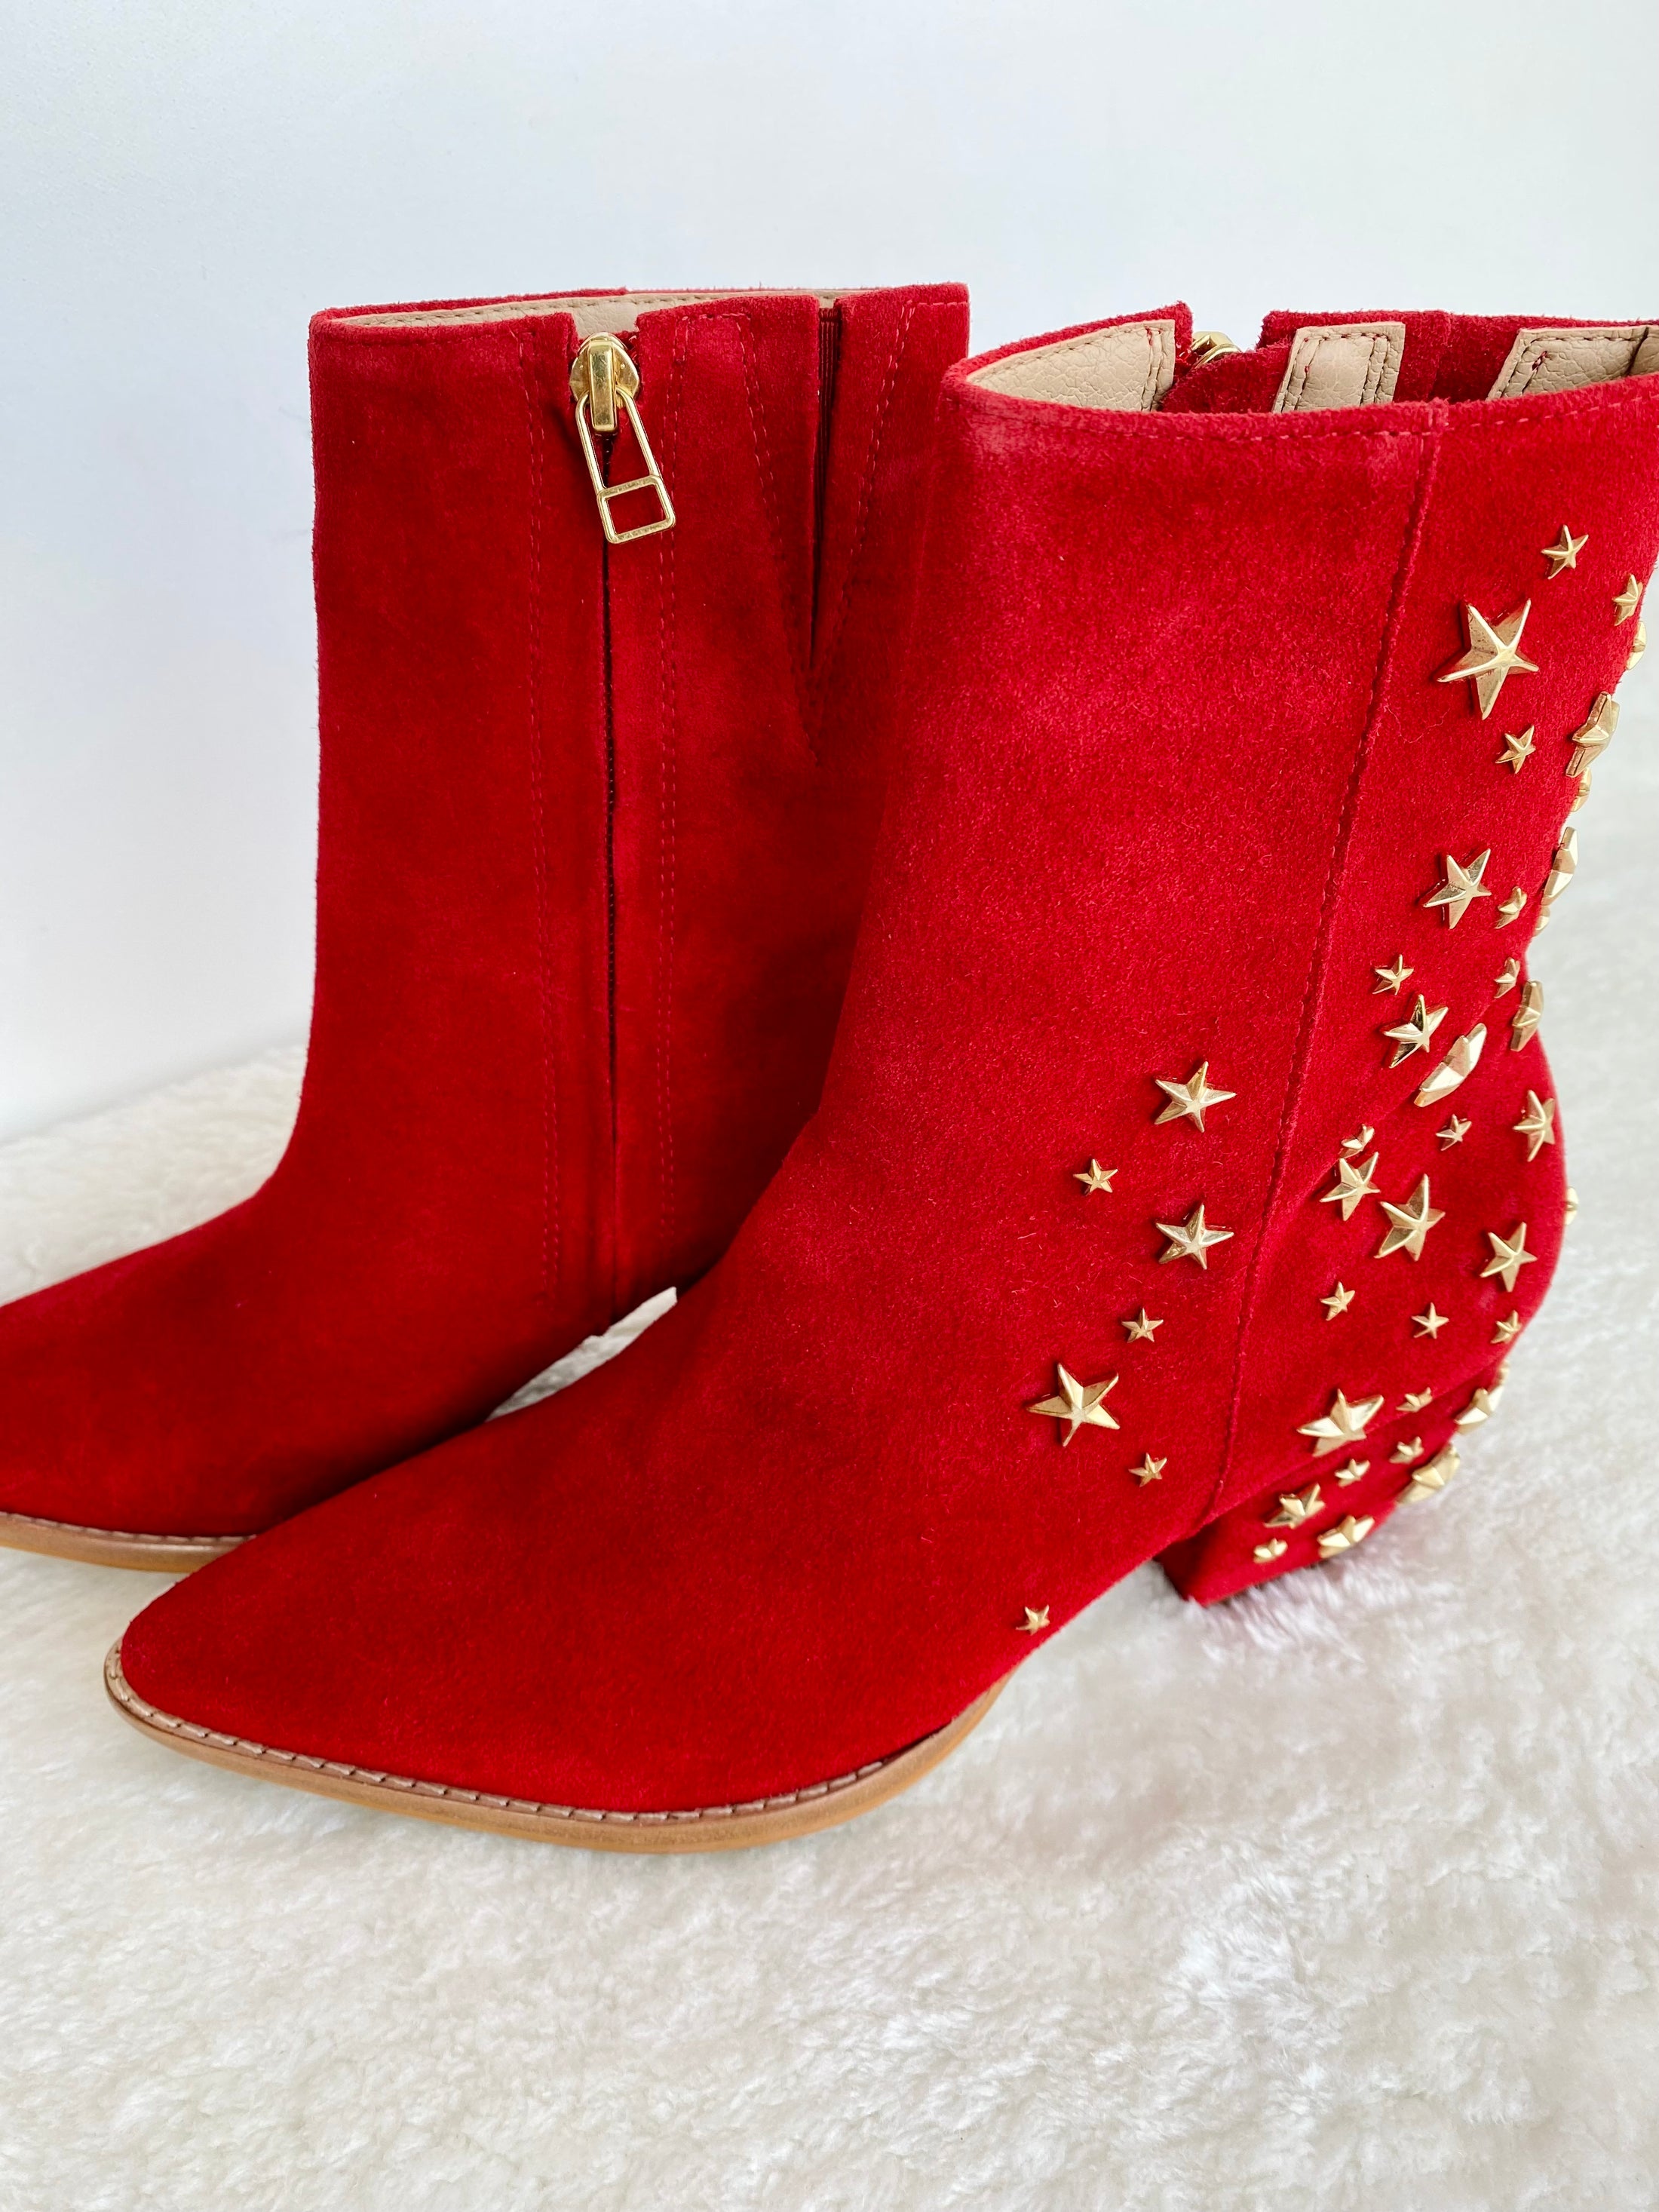 Gold zipper. and gold star red matisse boots